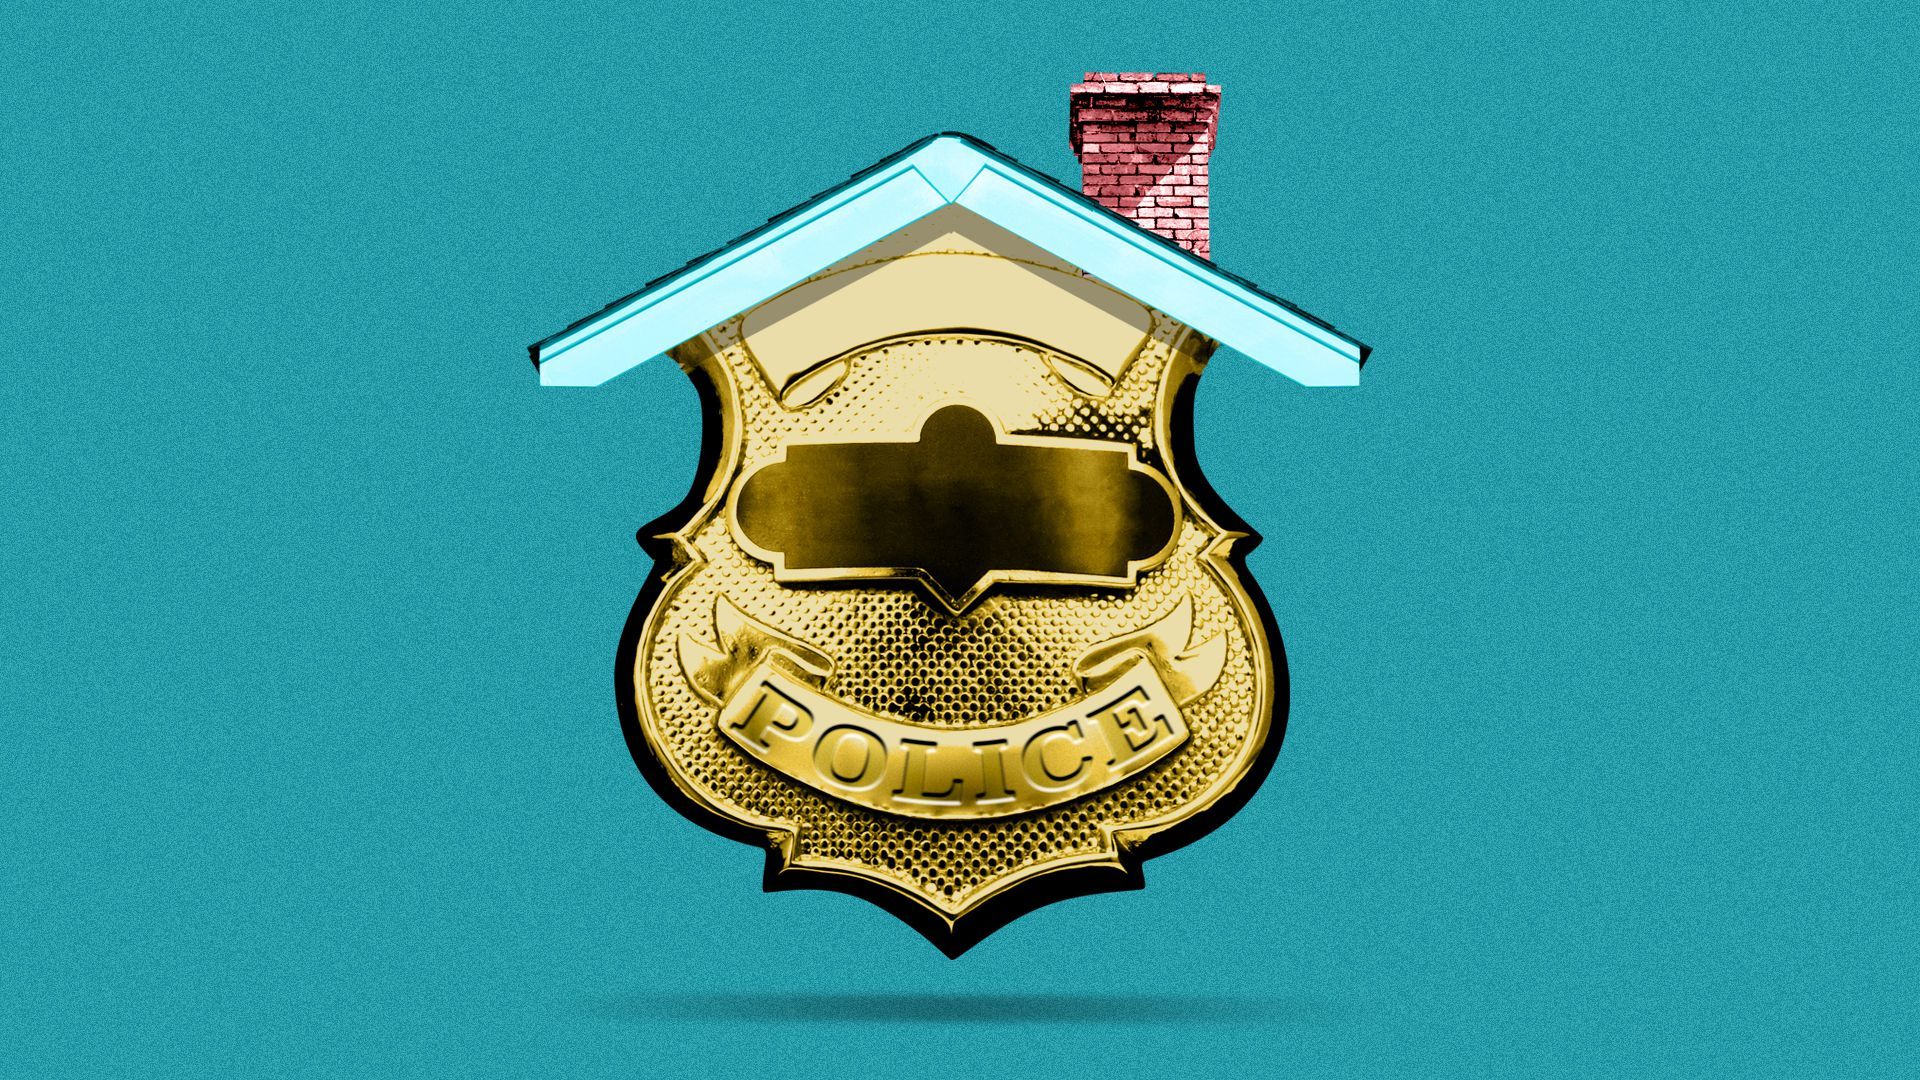 Illustration of a police badge with a roof and chimney on top of it.